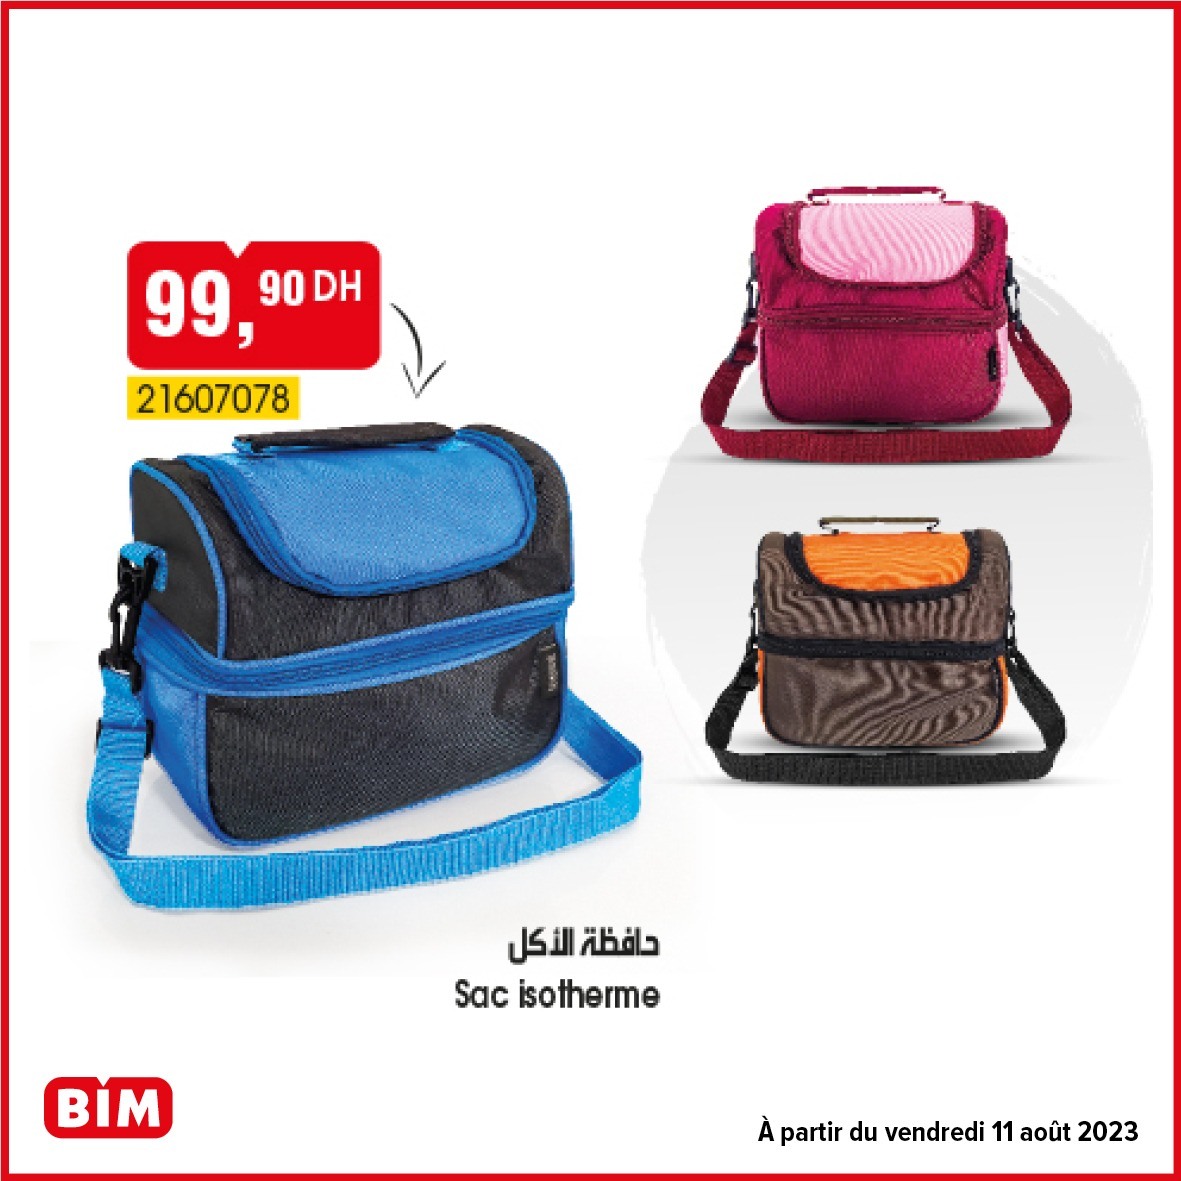 promotion bim 11 aout 2023 sac isotherme